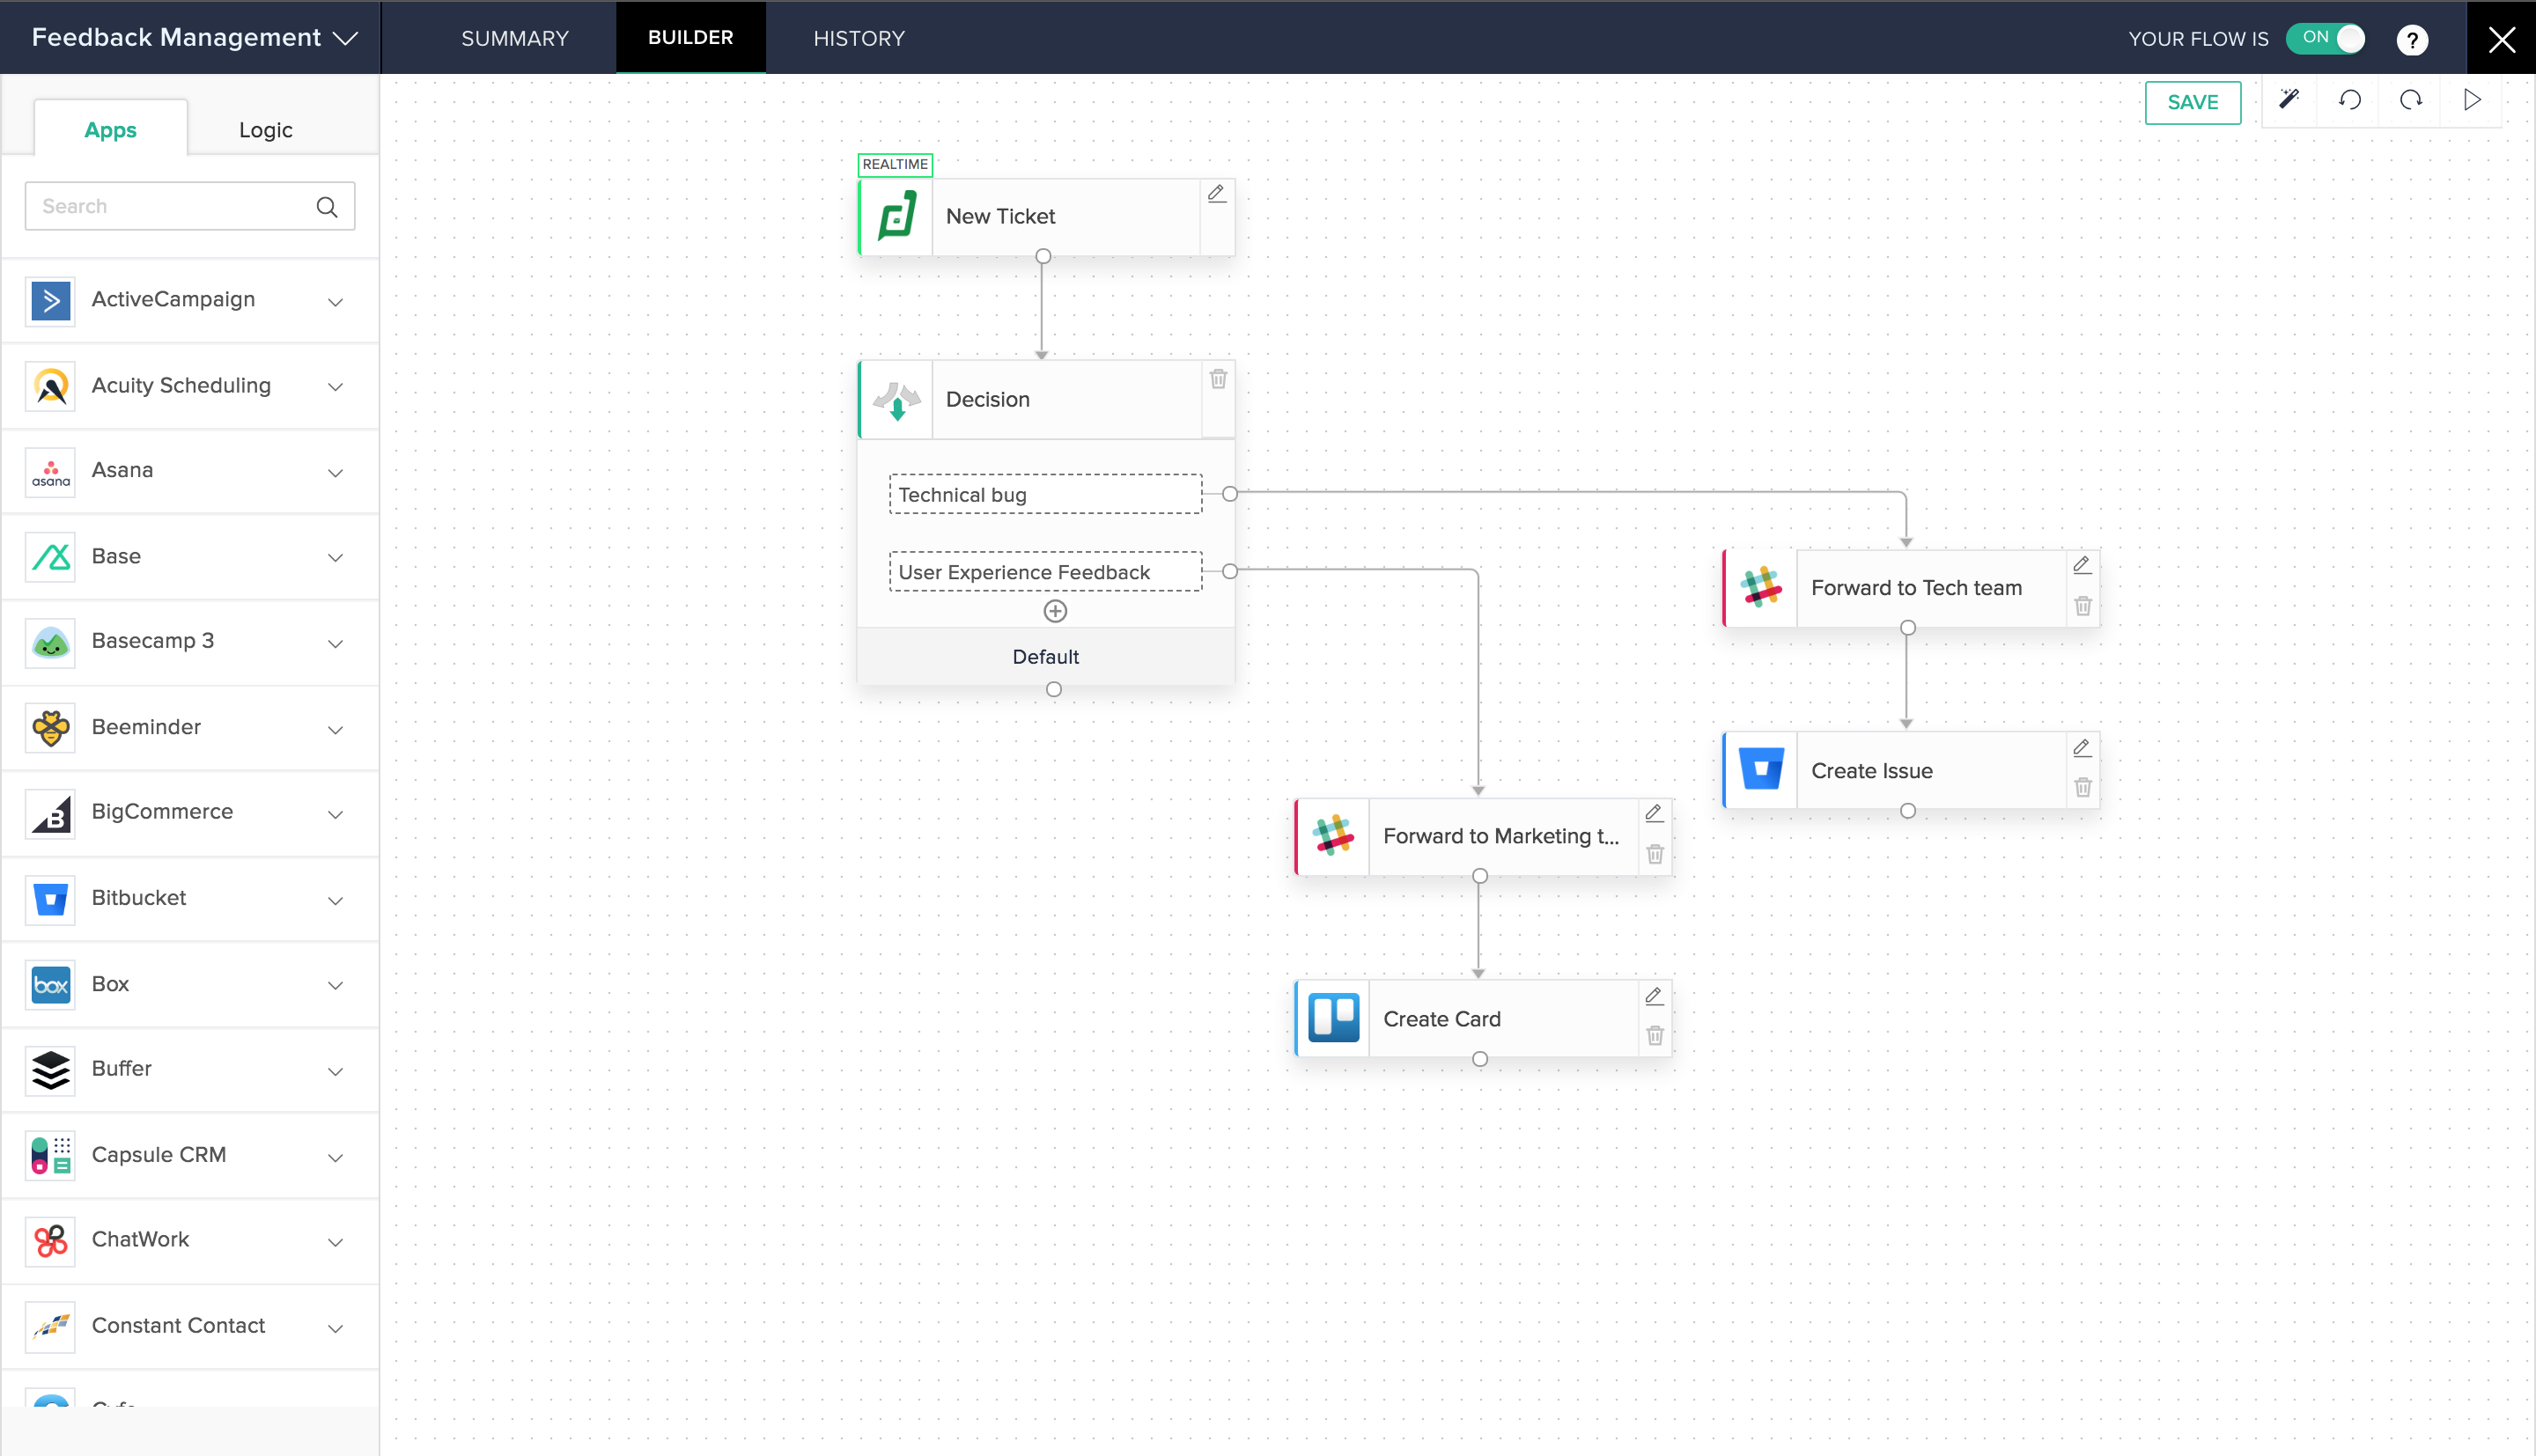 Zoho-Third Party Integrations on Zoho Flow